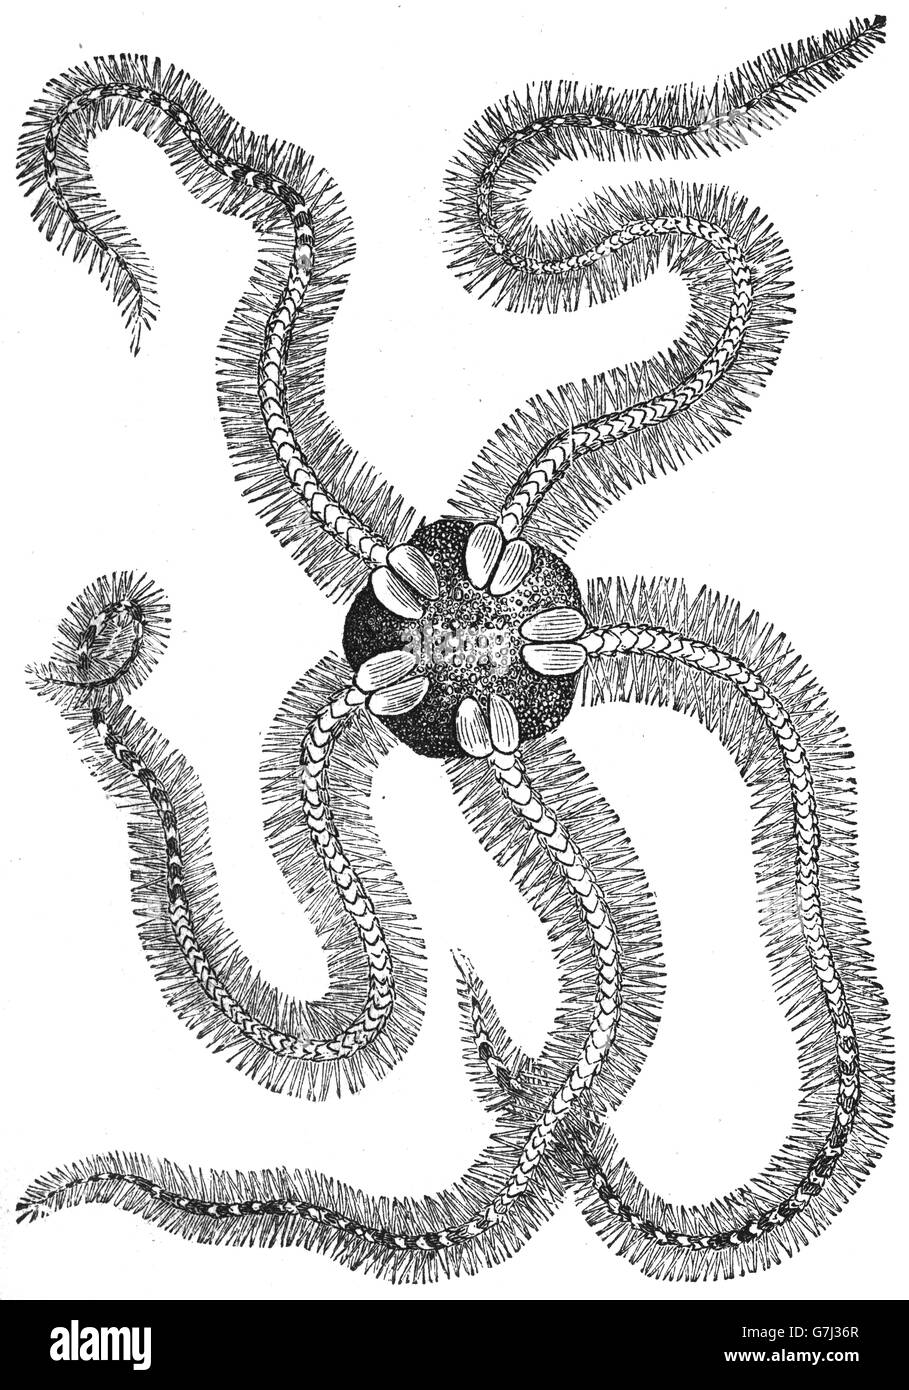 Ophiothrix fragilis, brittle star, illustration from book dated 1904 Stock Photo